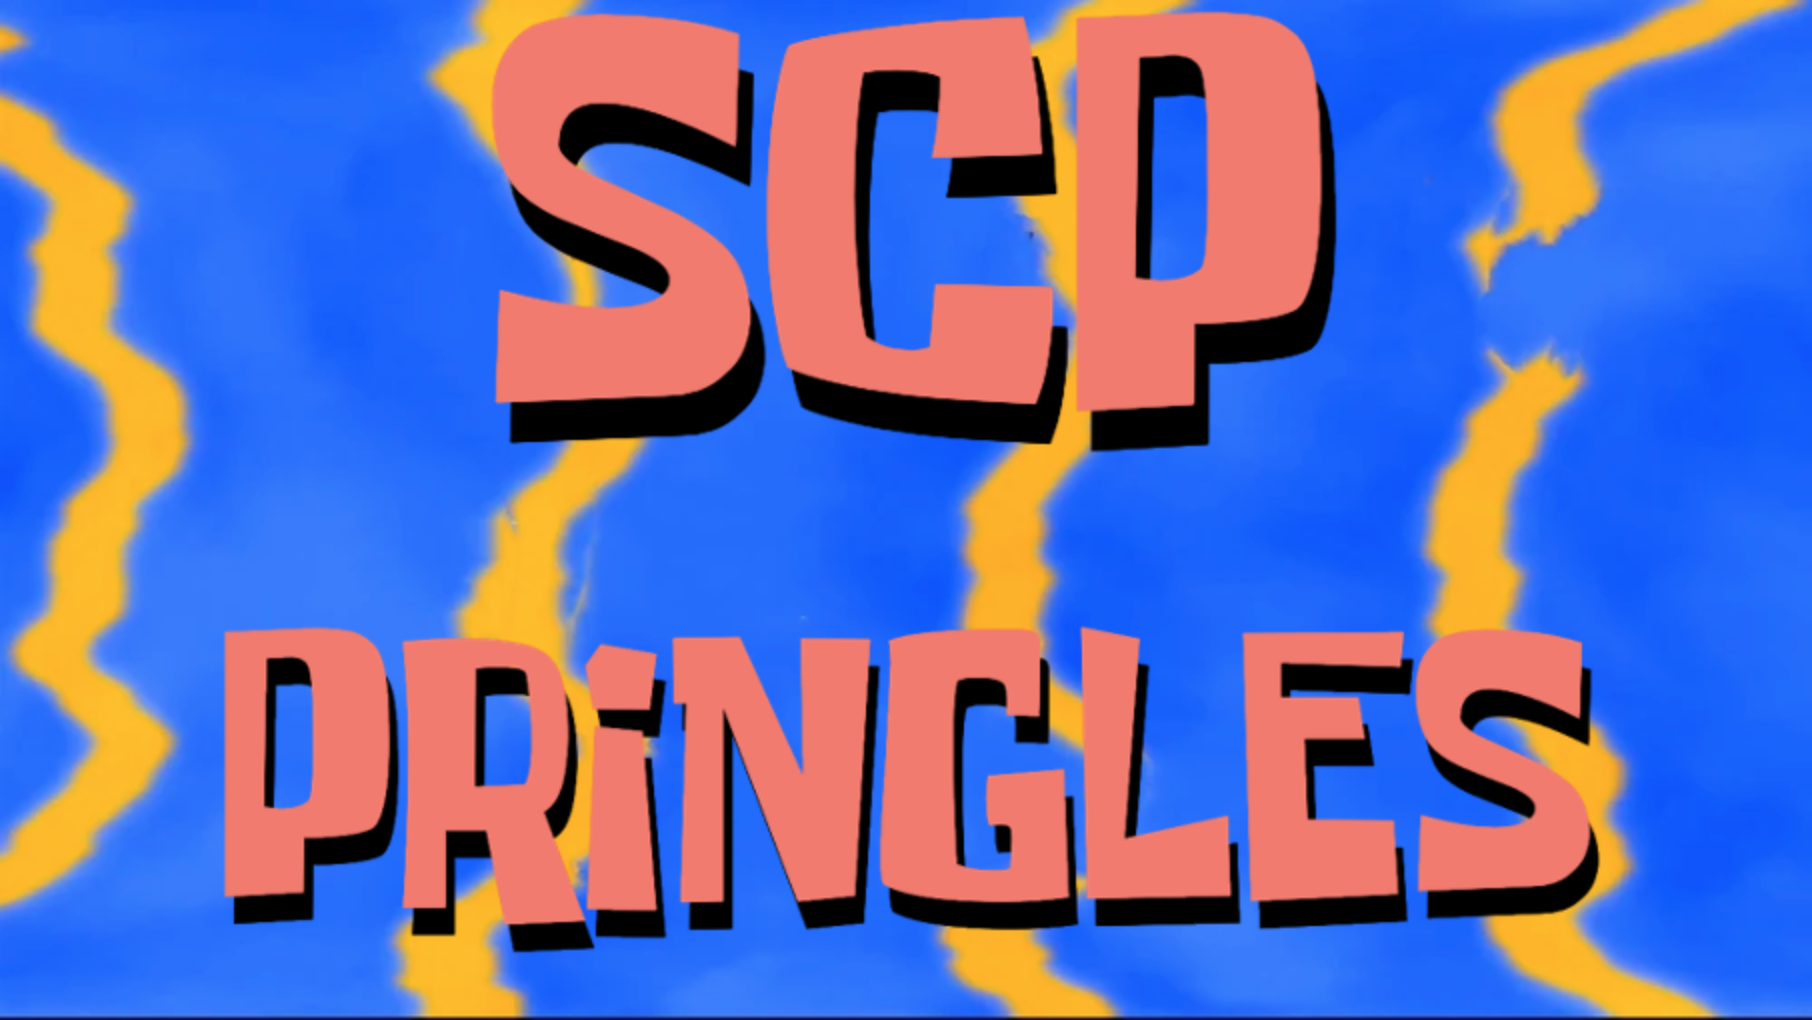 Hey guys, just reminding you that I'm still developing that SCP